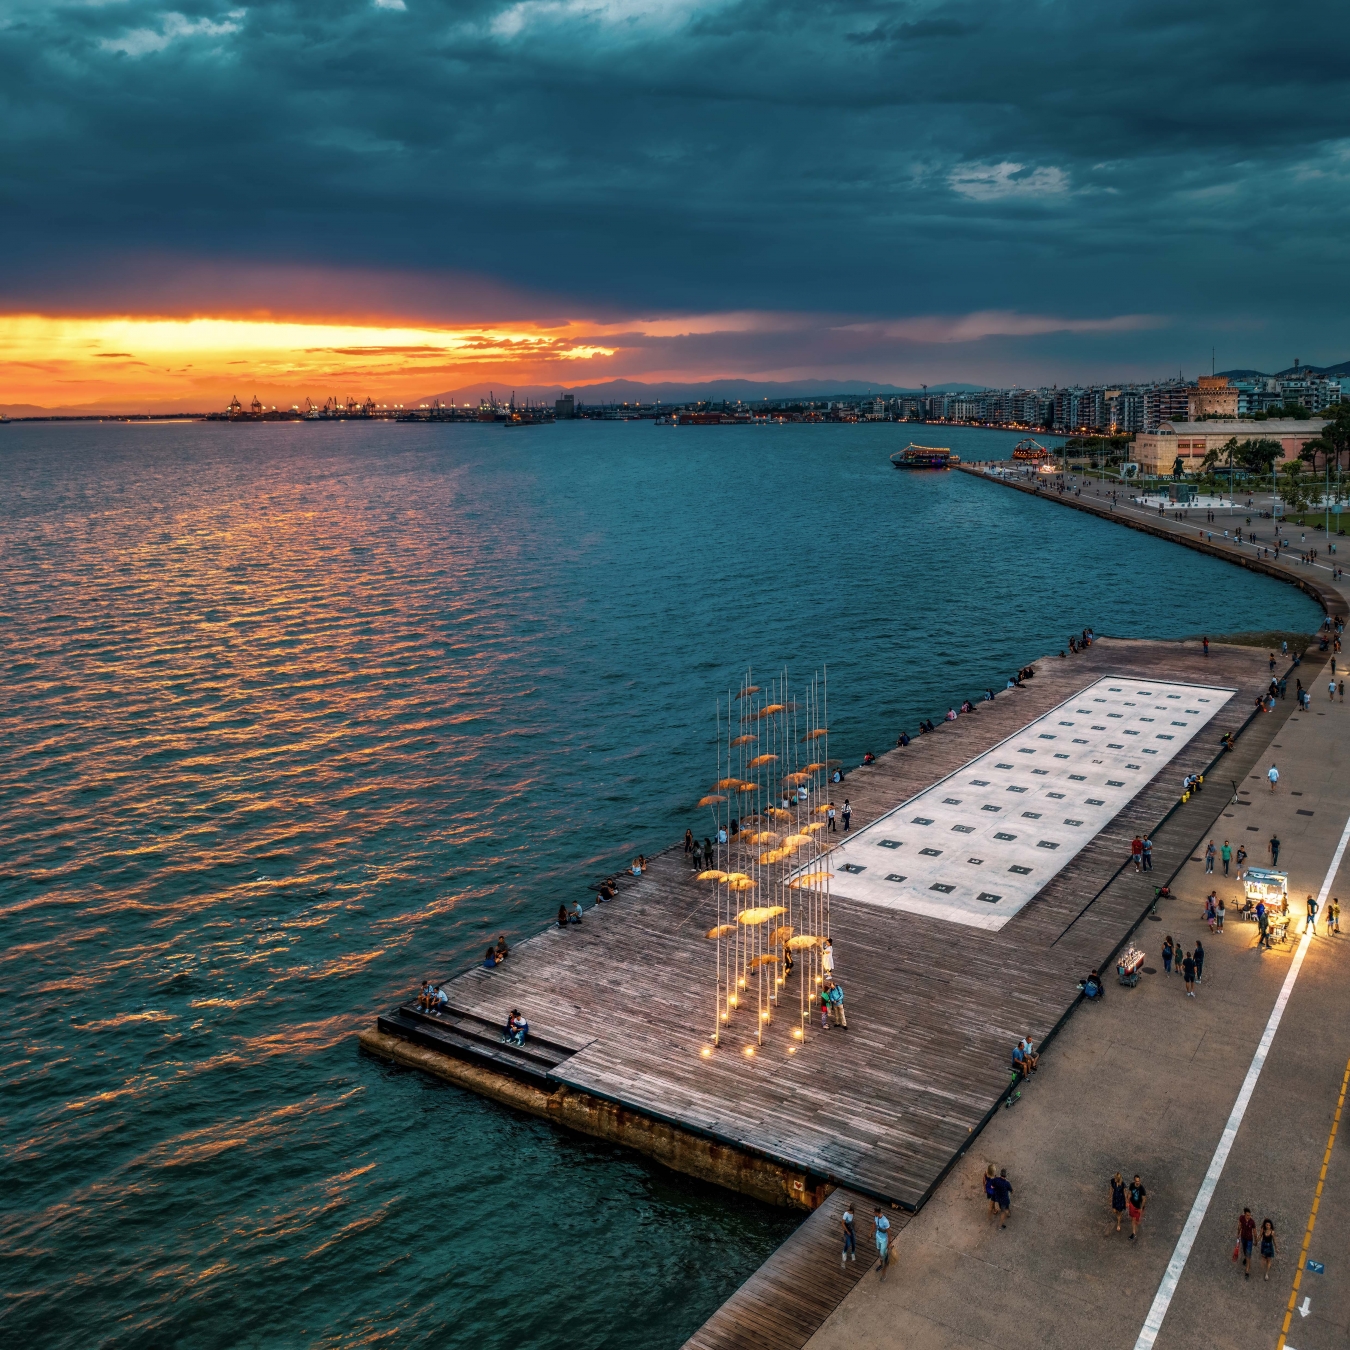 Top 5 things to enjoy on winter days in Thessaloniki